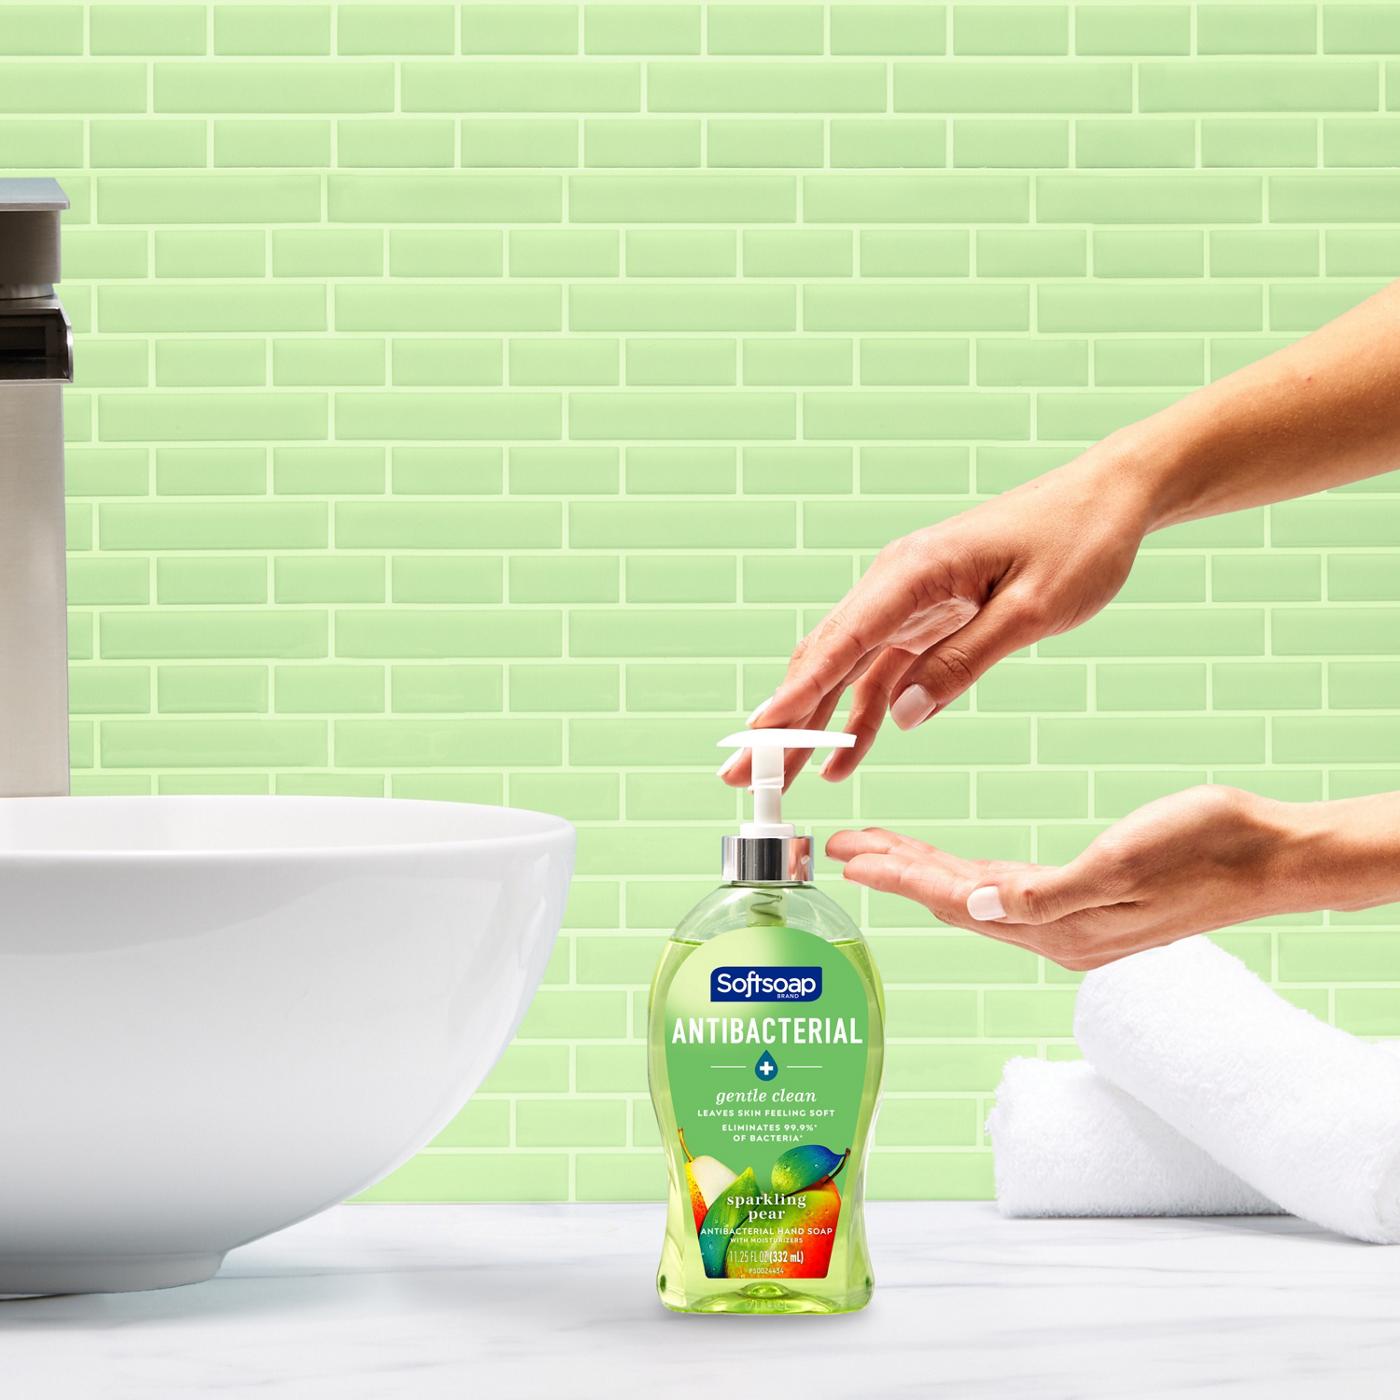 Softsoap Antibacterial Hand Soap - Sparkling Pear; image 4 of 4